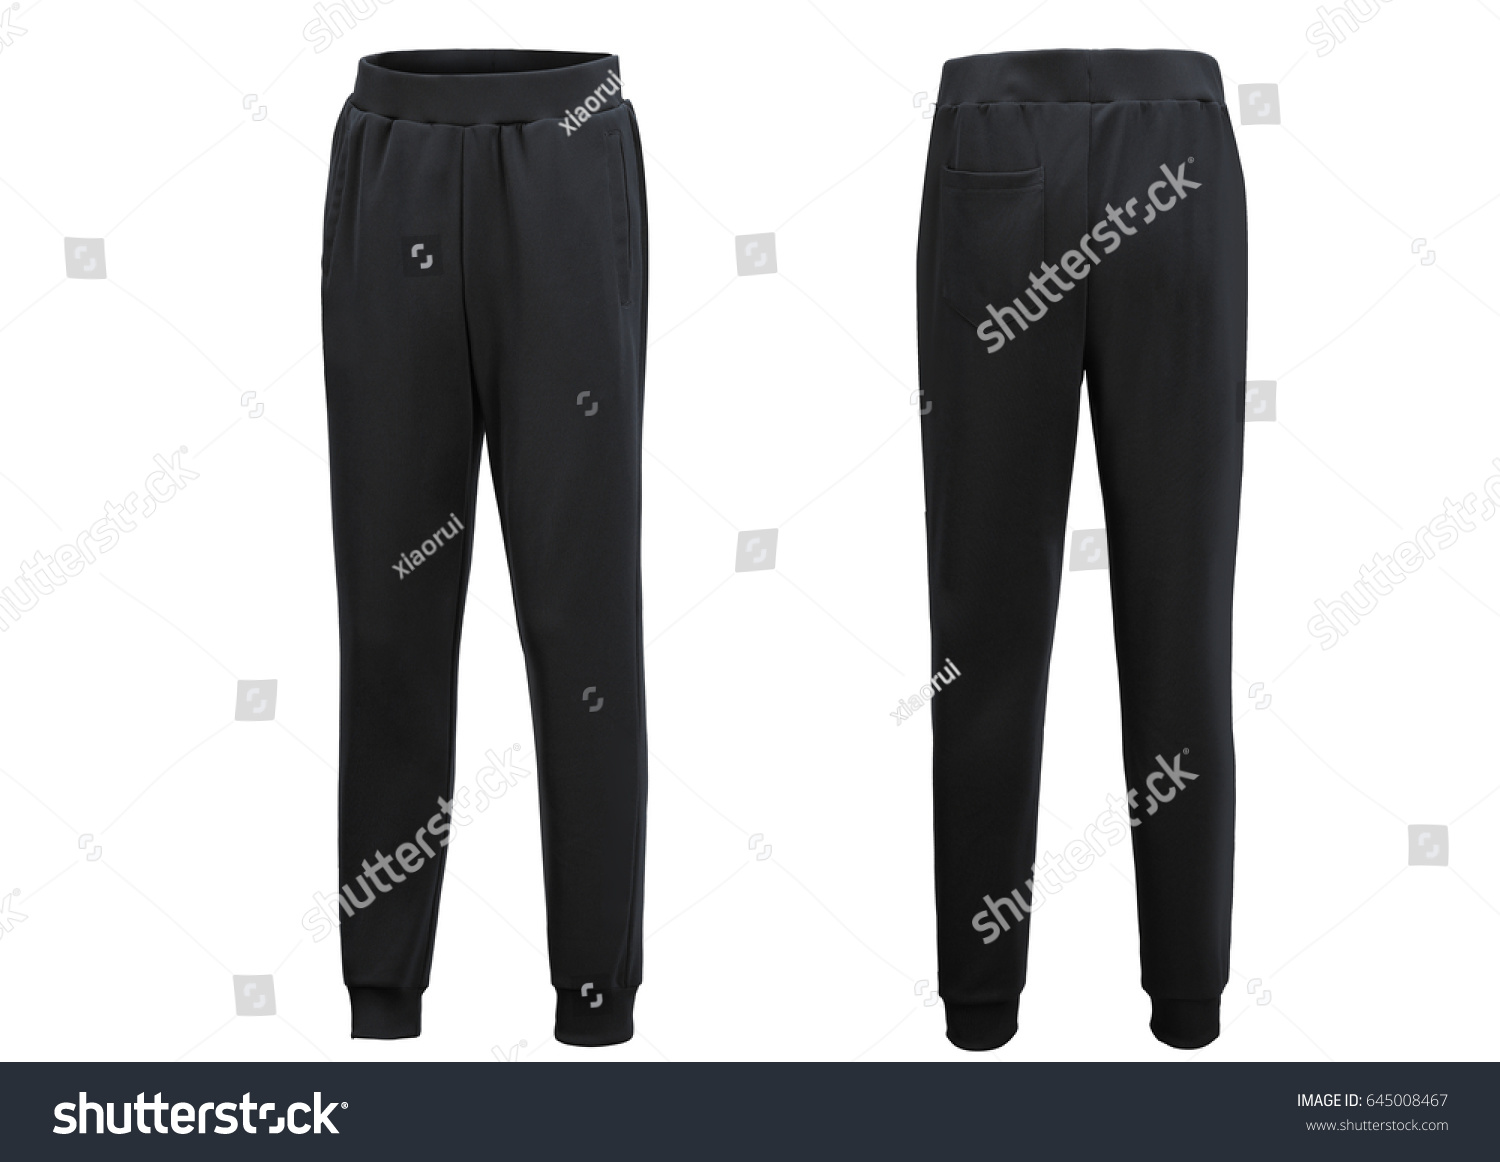 1,041 Mens sports pants Stock Photos, Images & Photography | Shutterstock